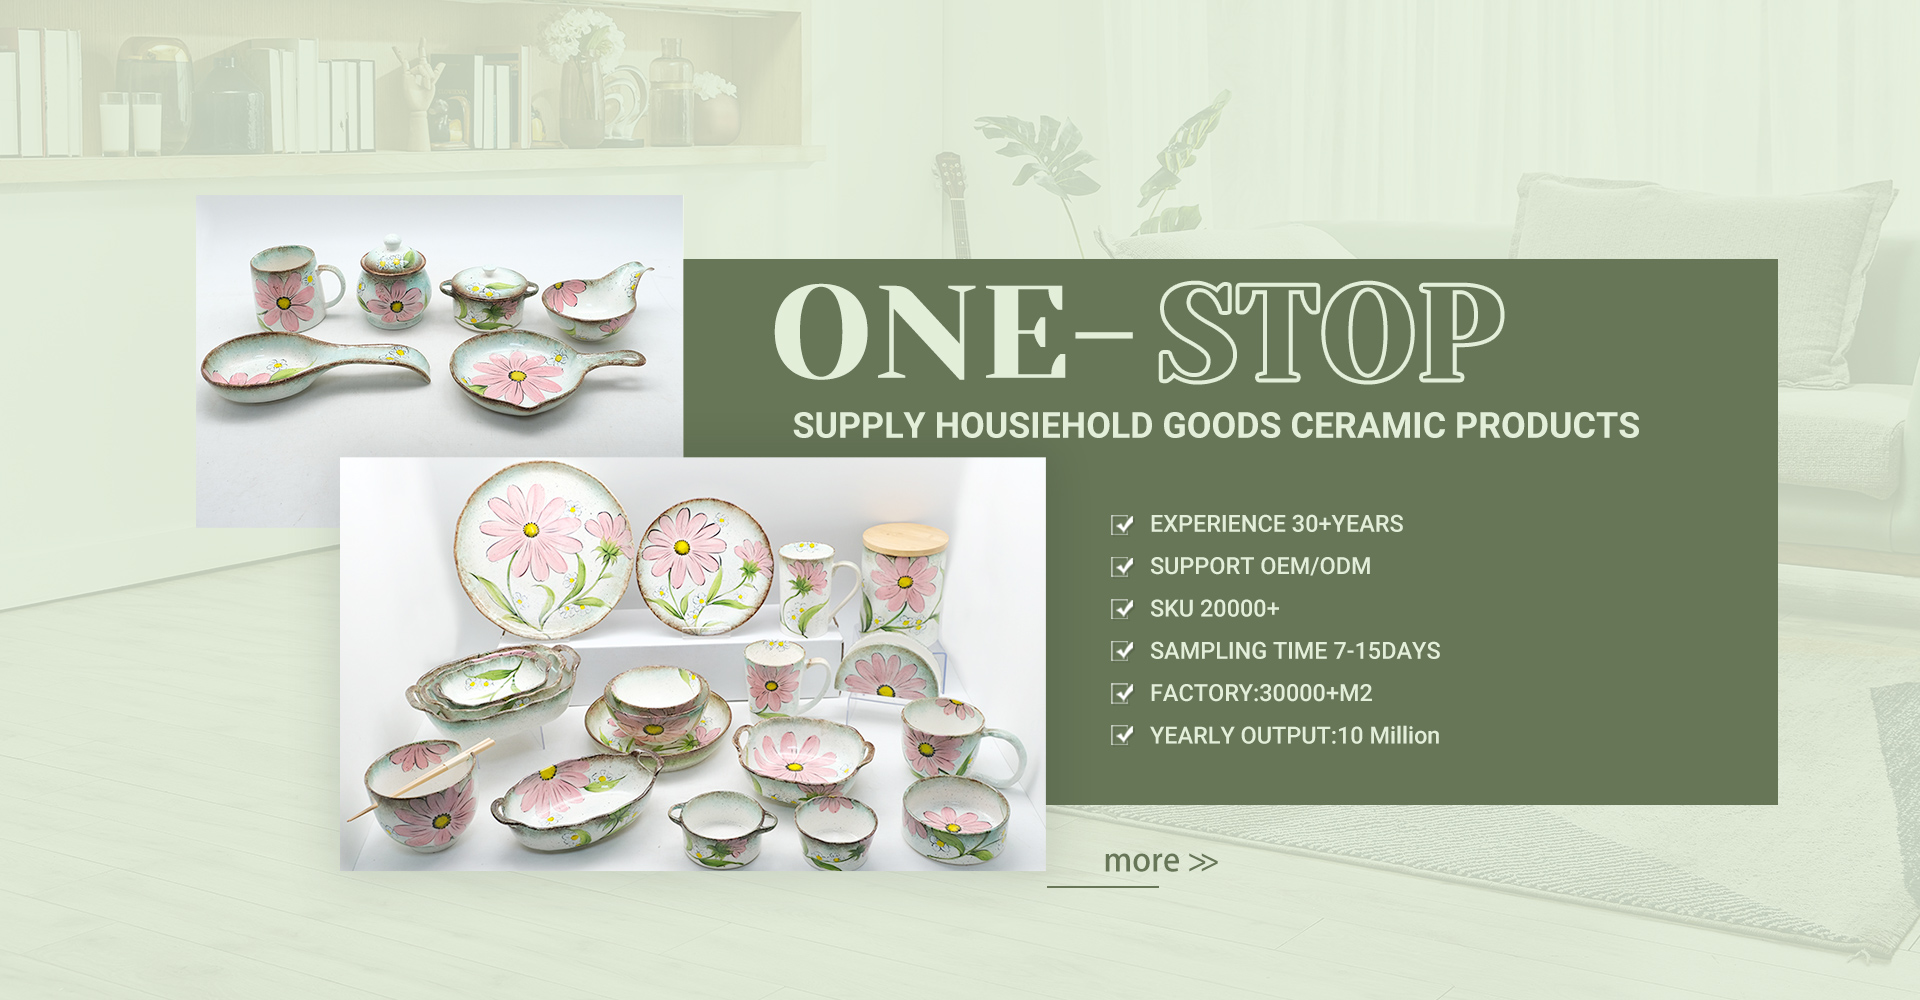 One- Stop Supply Household Goods Ceramic Products